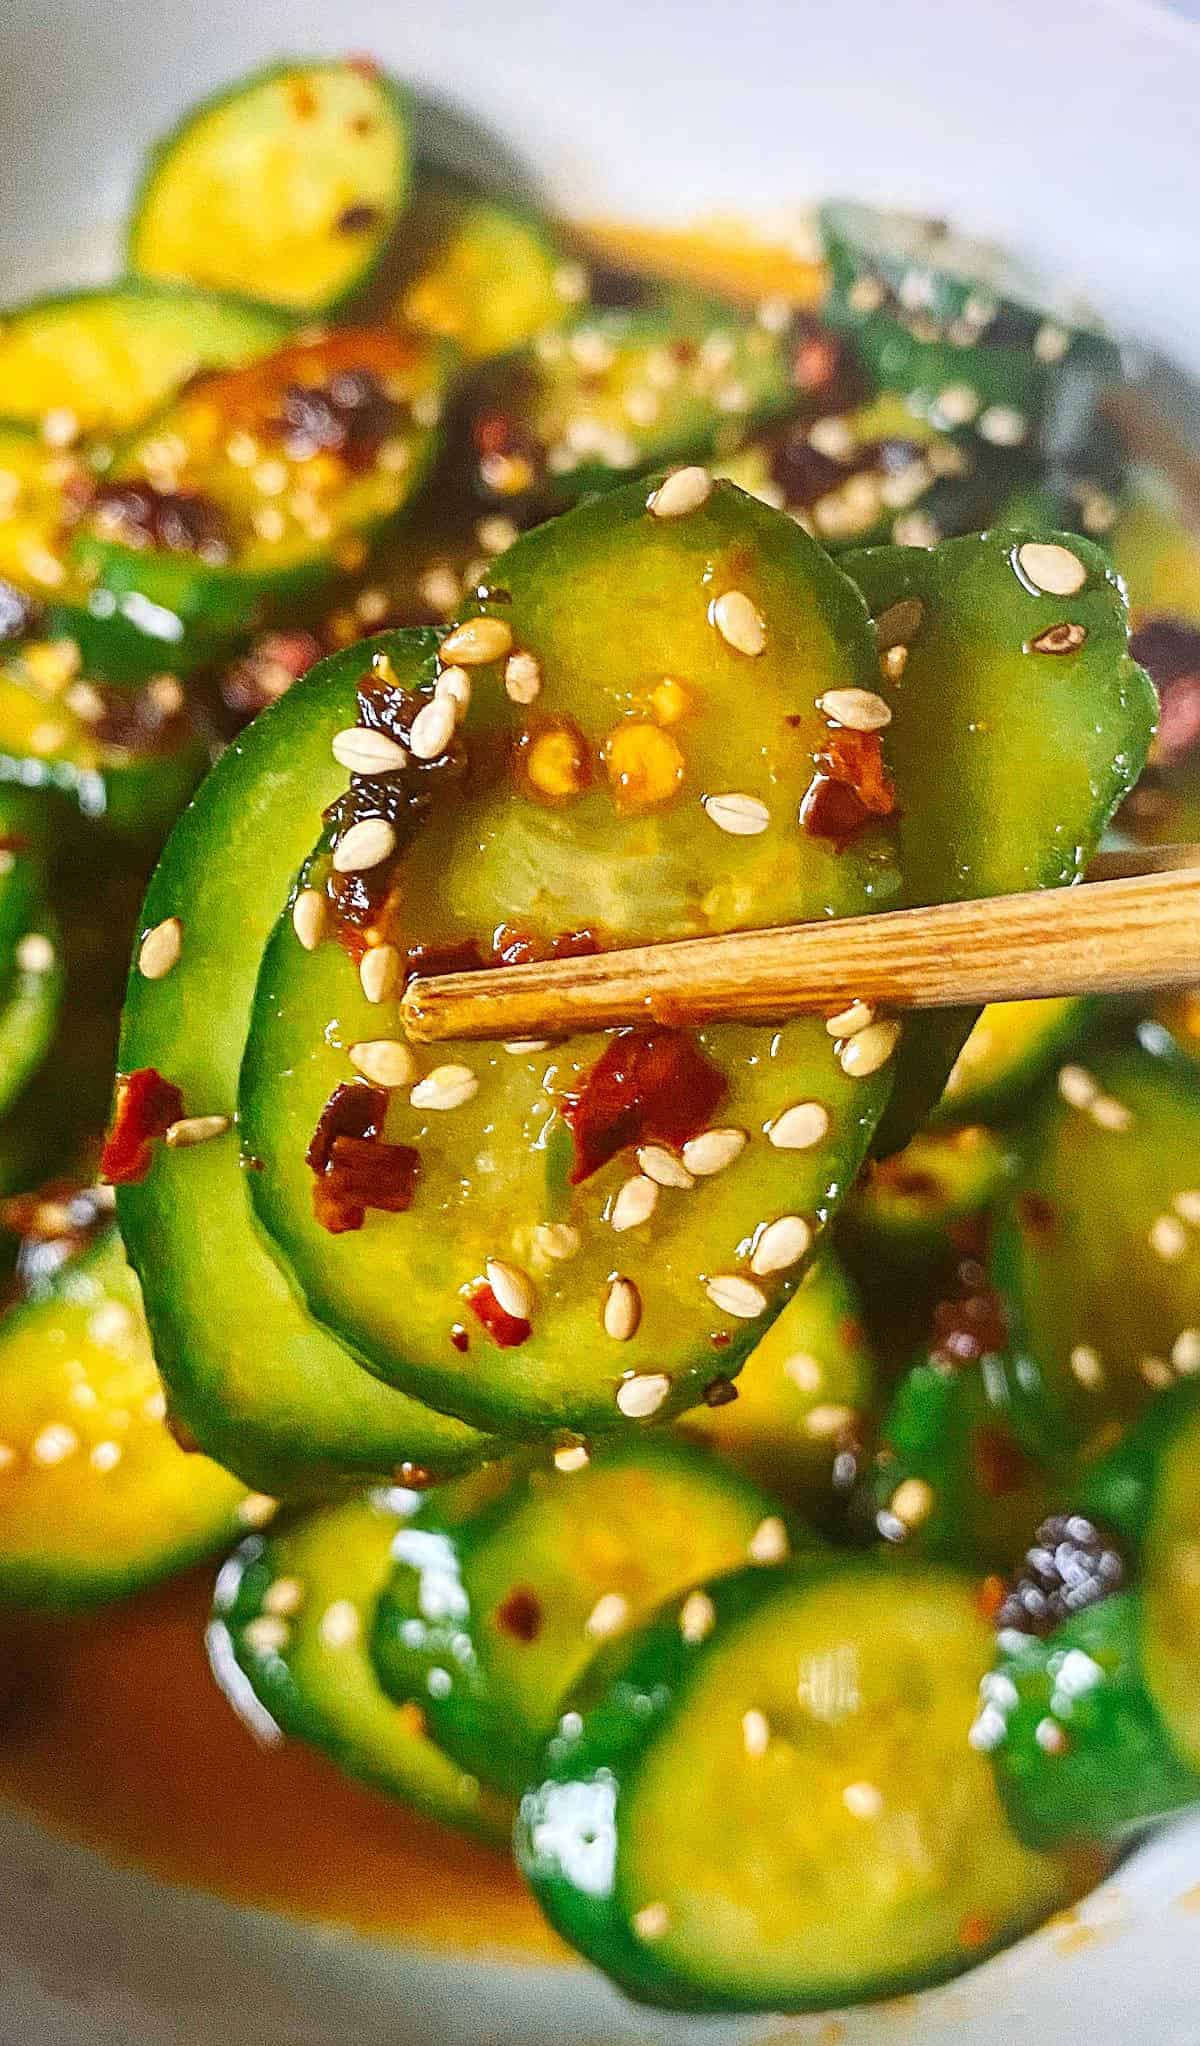  Spicy, tangy, and sweet, this Cambodian cucumber salad has it all!